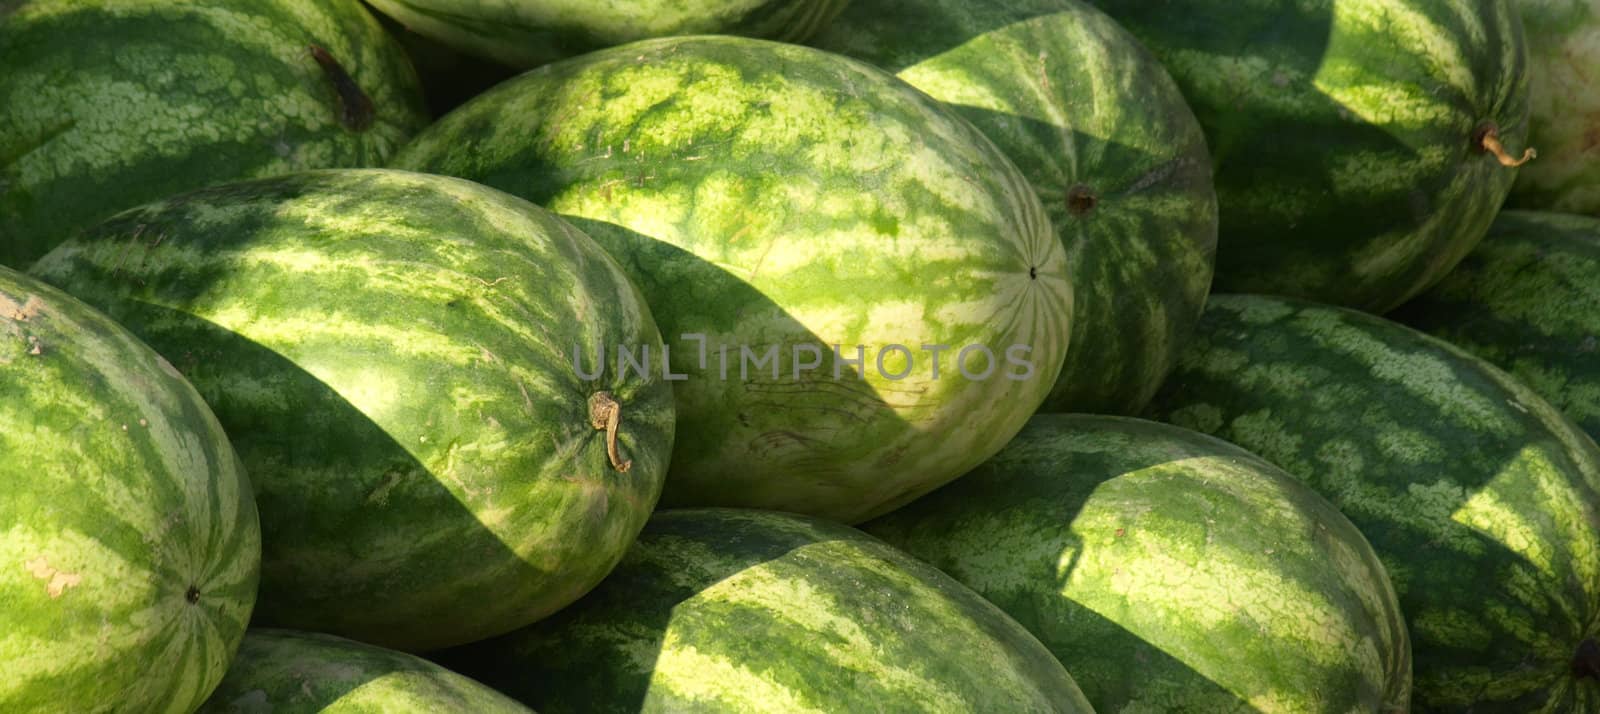 Watermelon for sale by northwoodsphoto